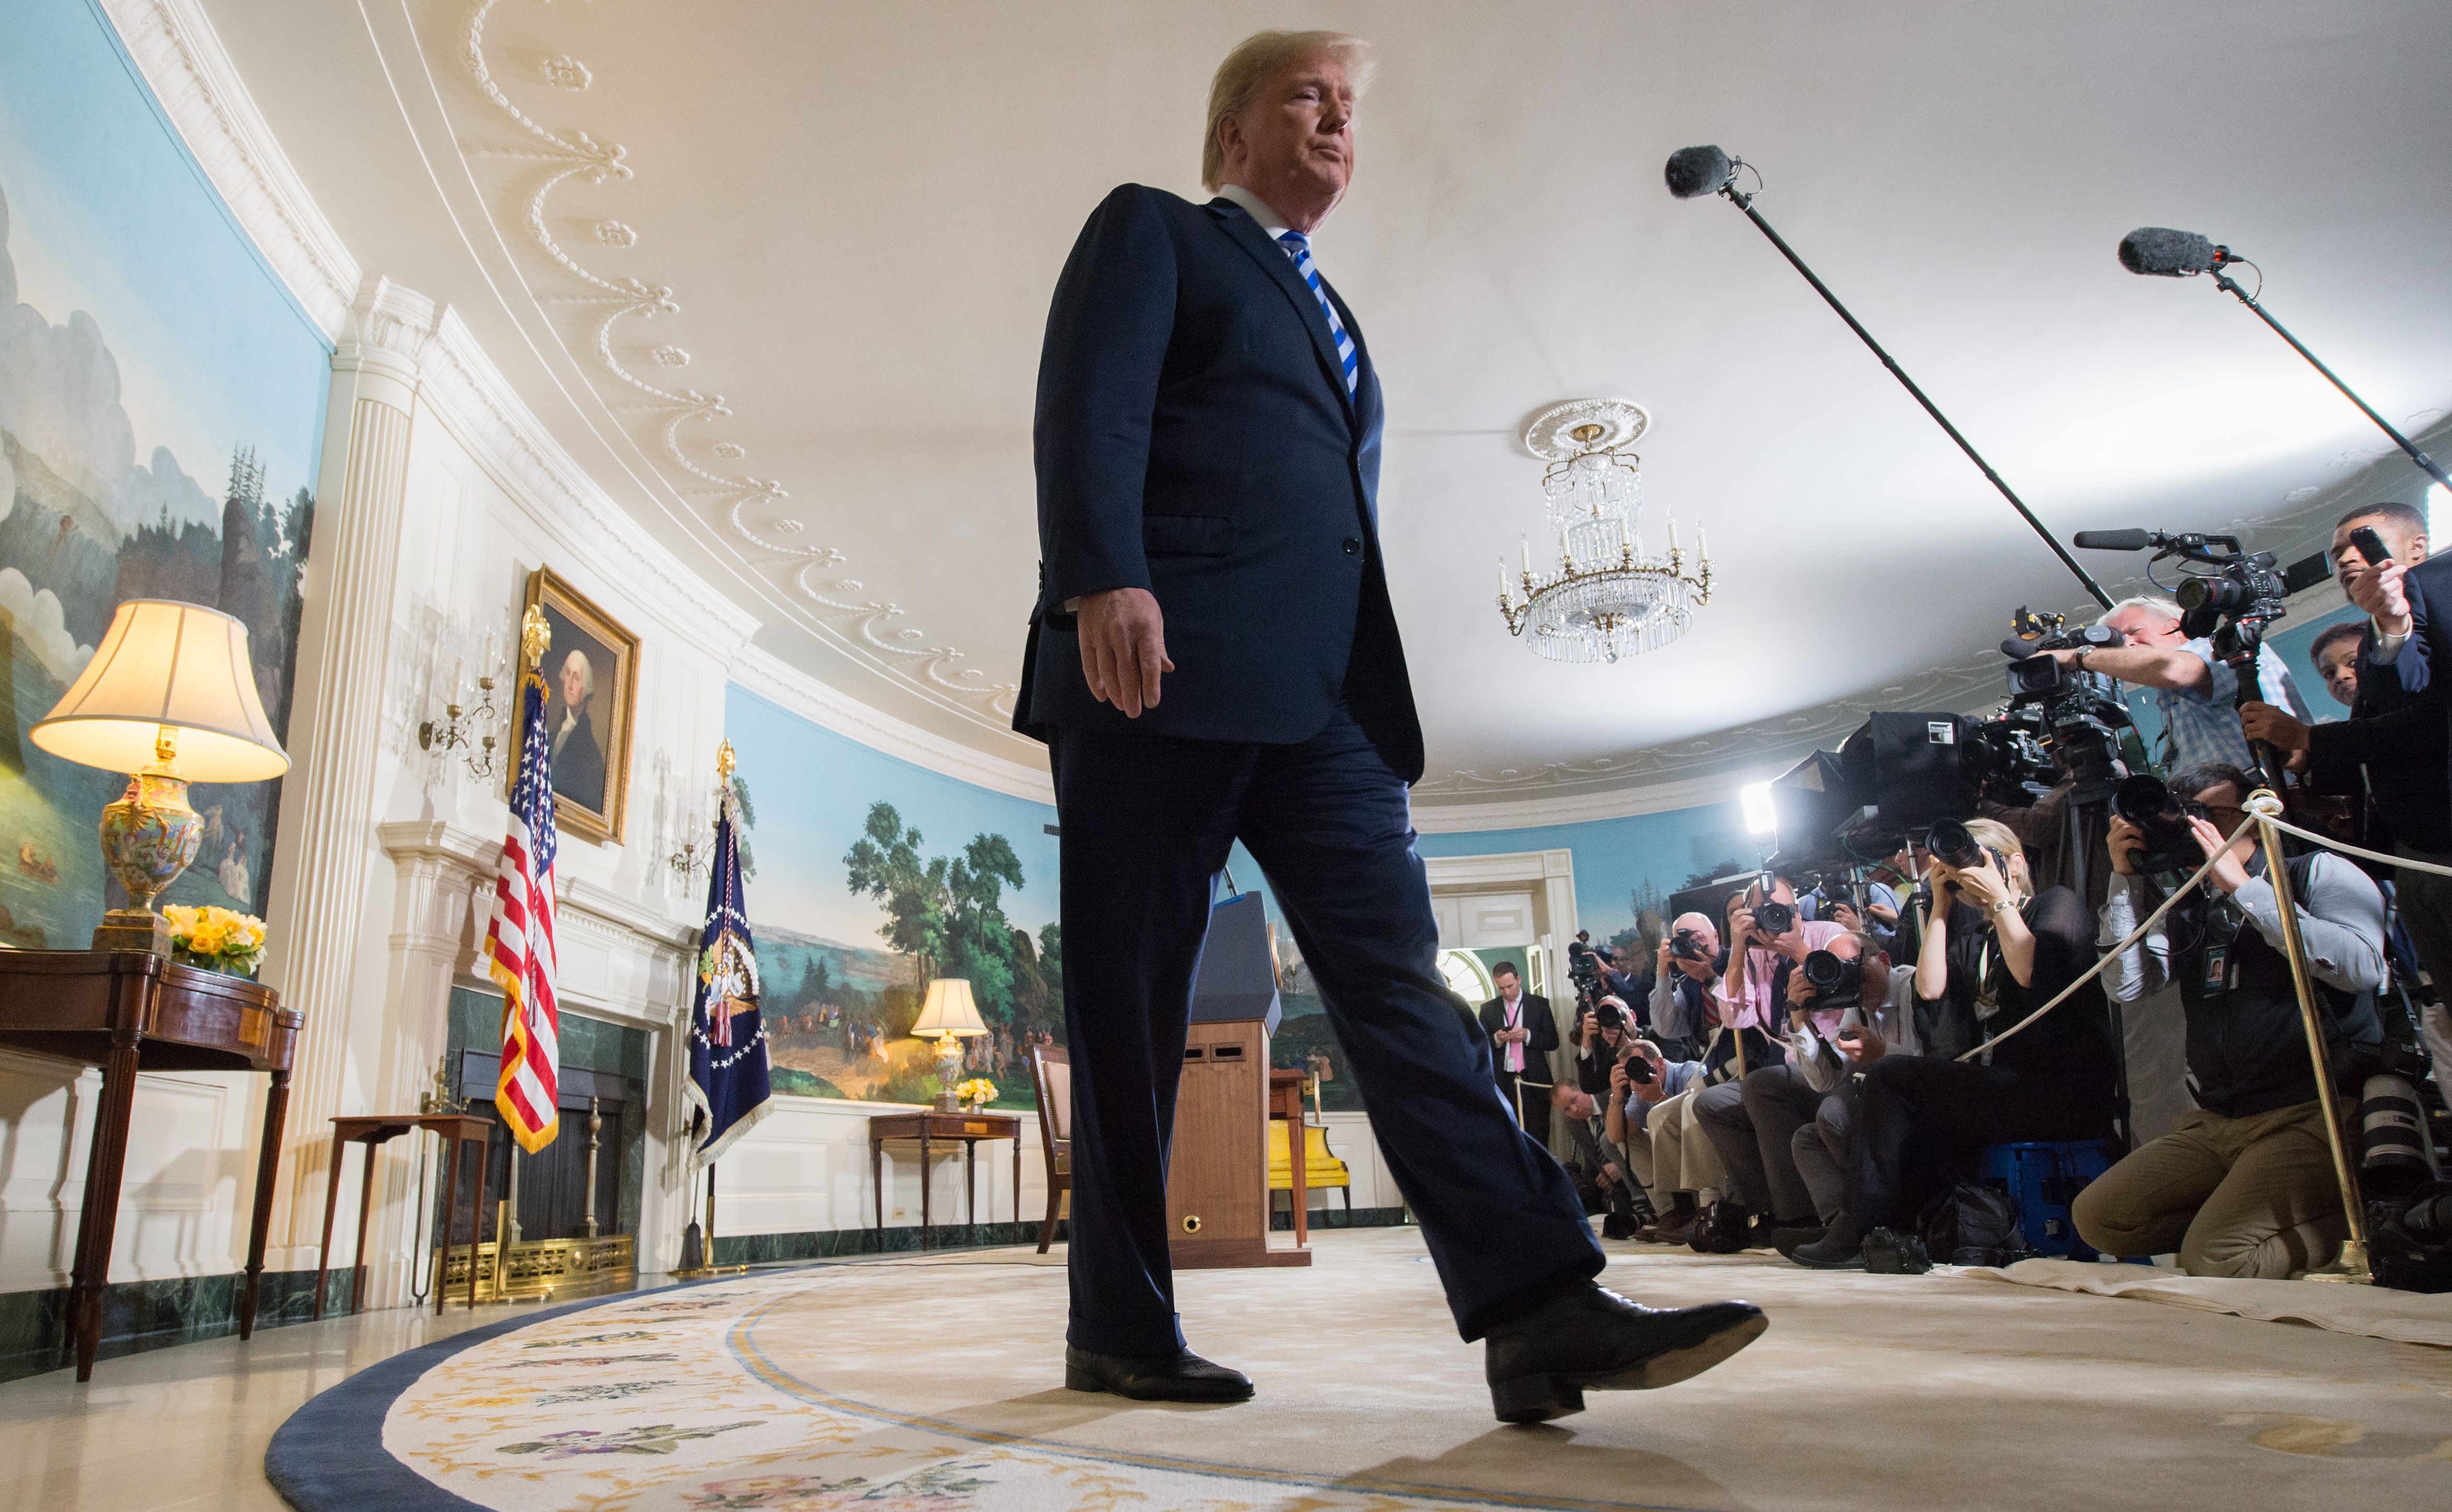 US President Donald Trump leaves after announcing his decision about the nuclear deal with Iran during a speech from the Diplomatic Reception Room at the White House in Washington, DC, May 8, 2018.